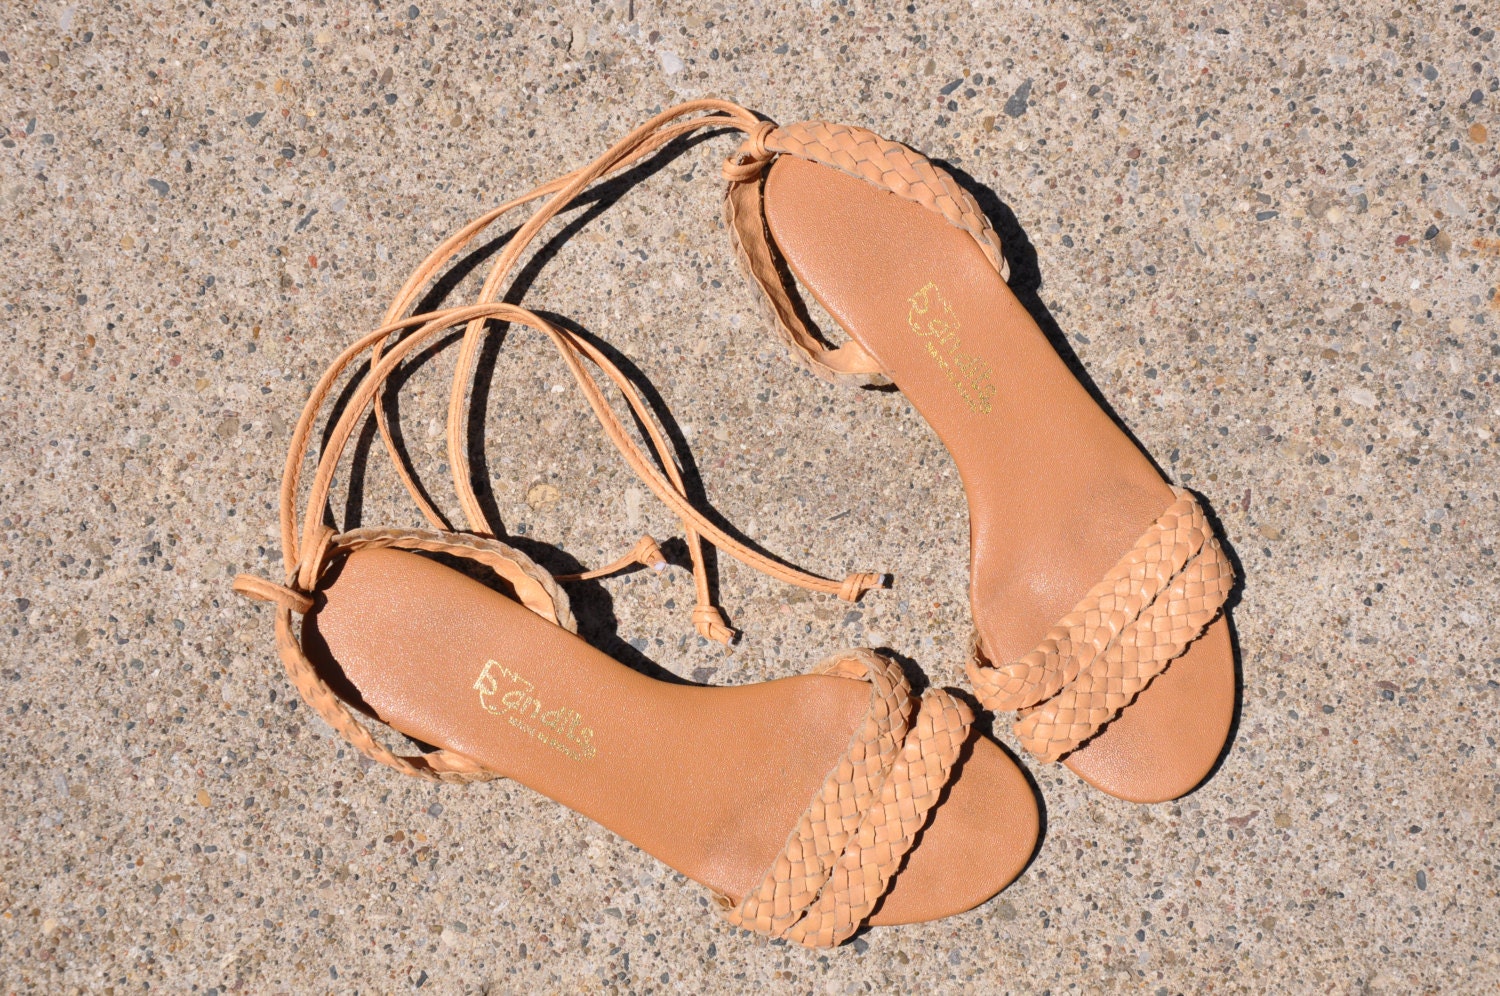 70s braided leather wedge sandals / vintage tan leather strappy wedges / Bandits sandals - QuietUnrest